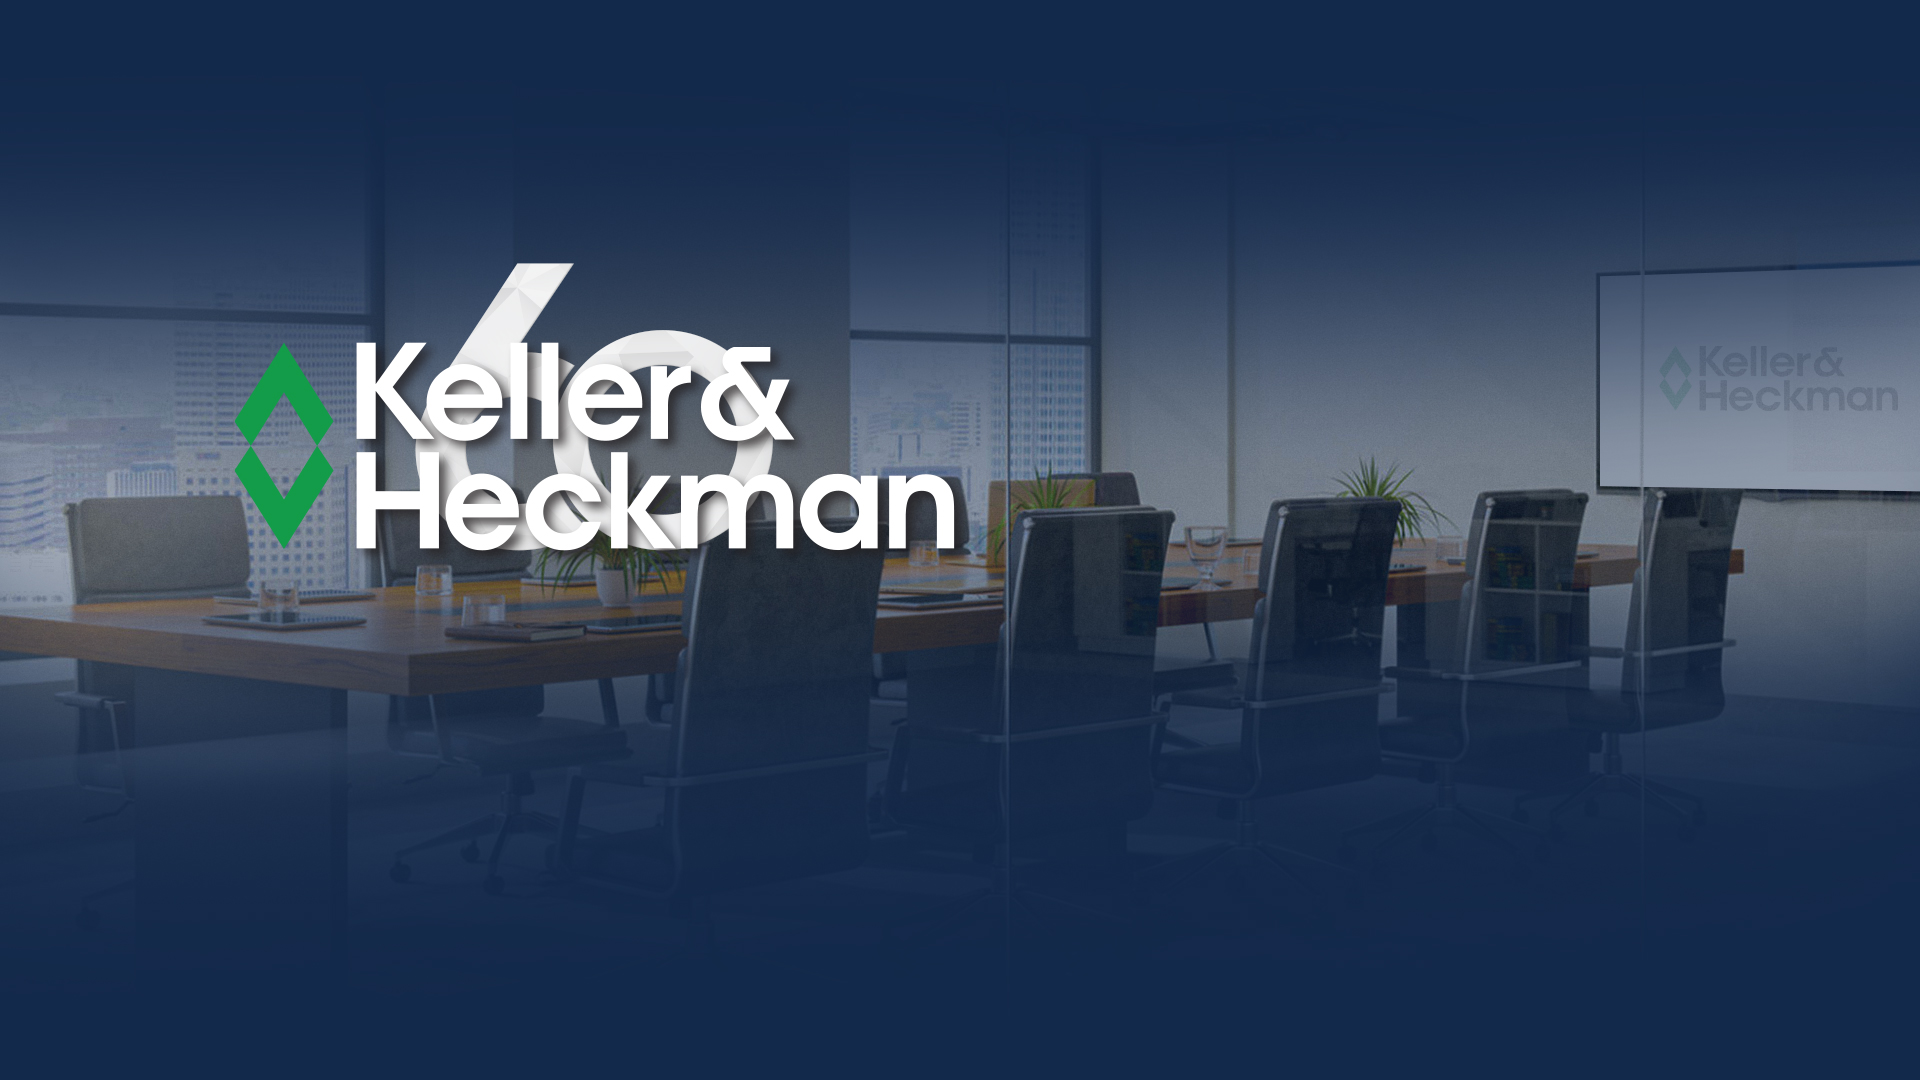 Keller and Heckman celebrates 60 years of excellence.